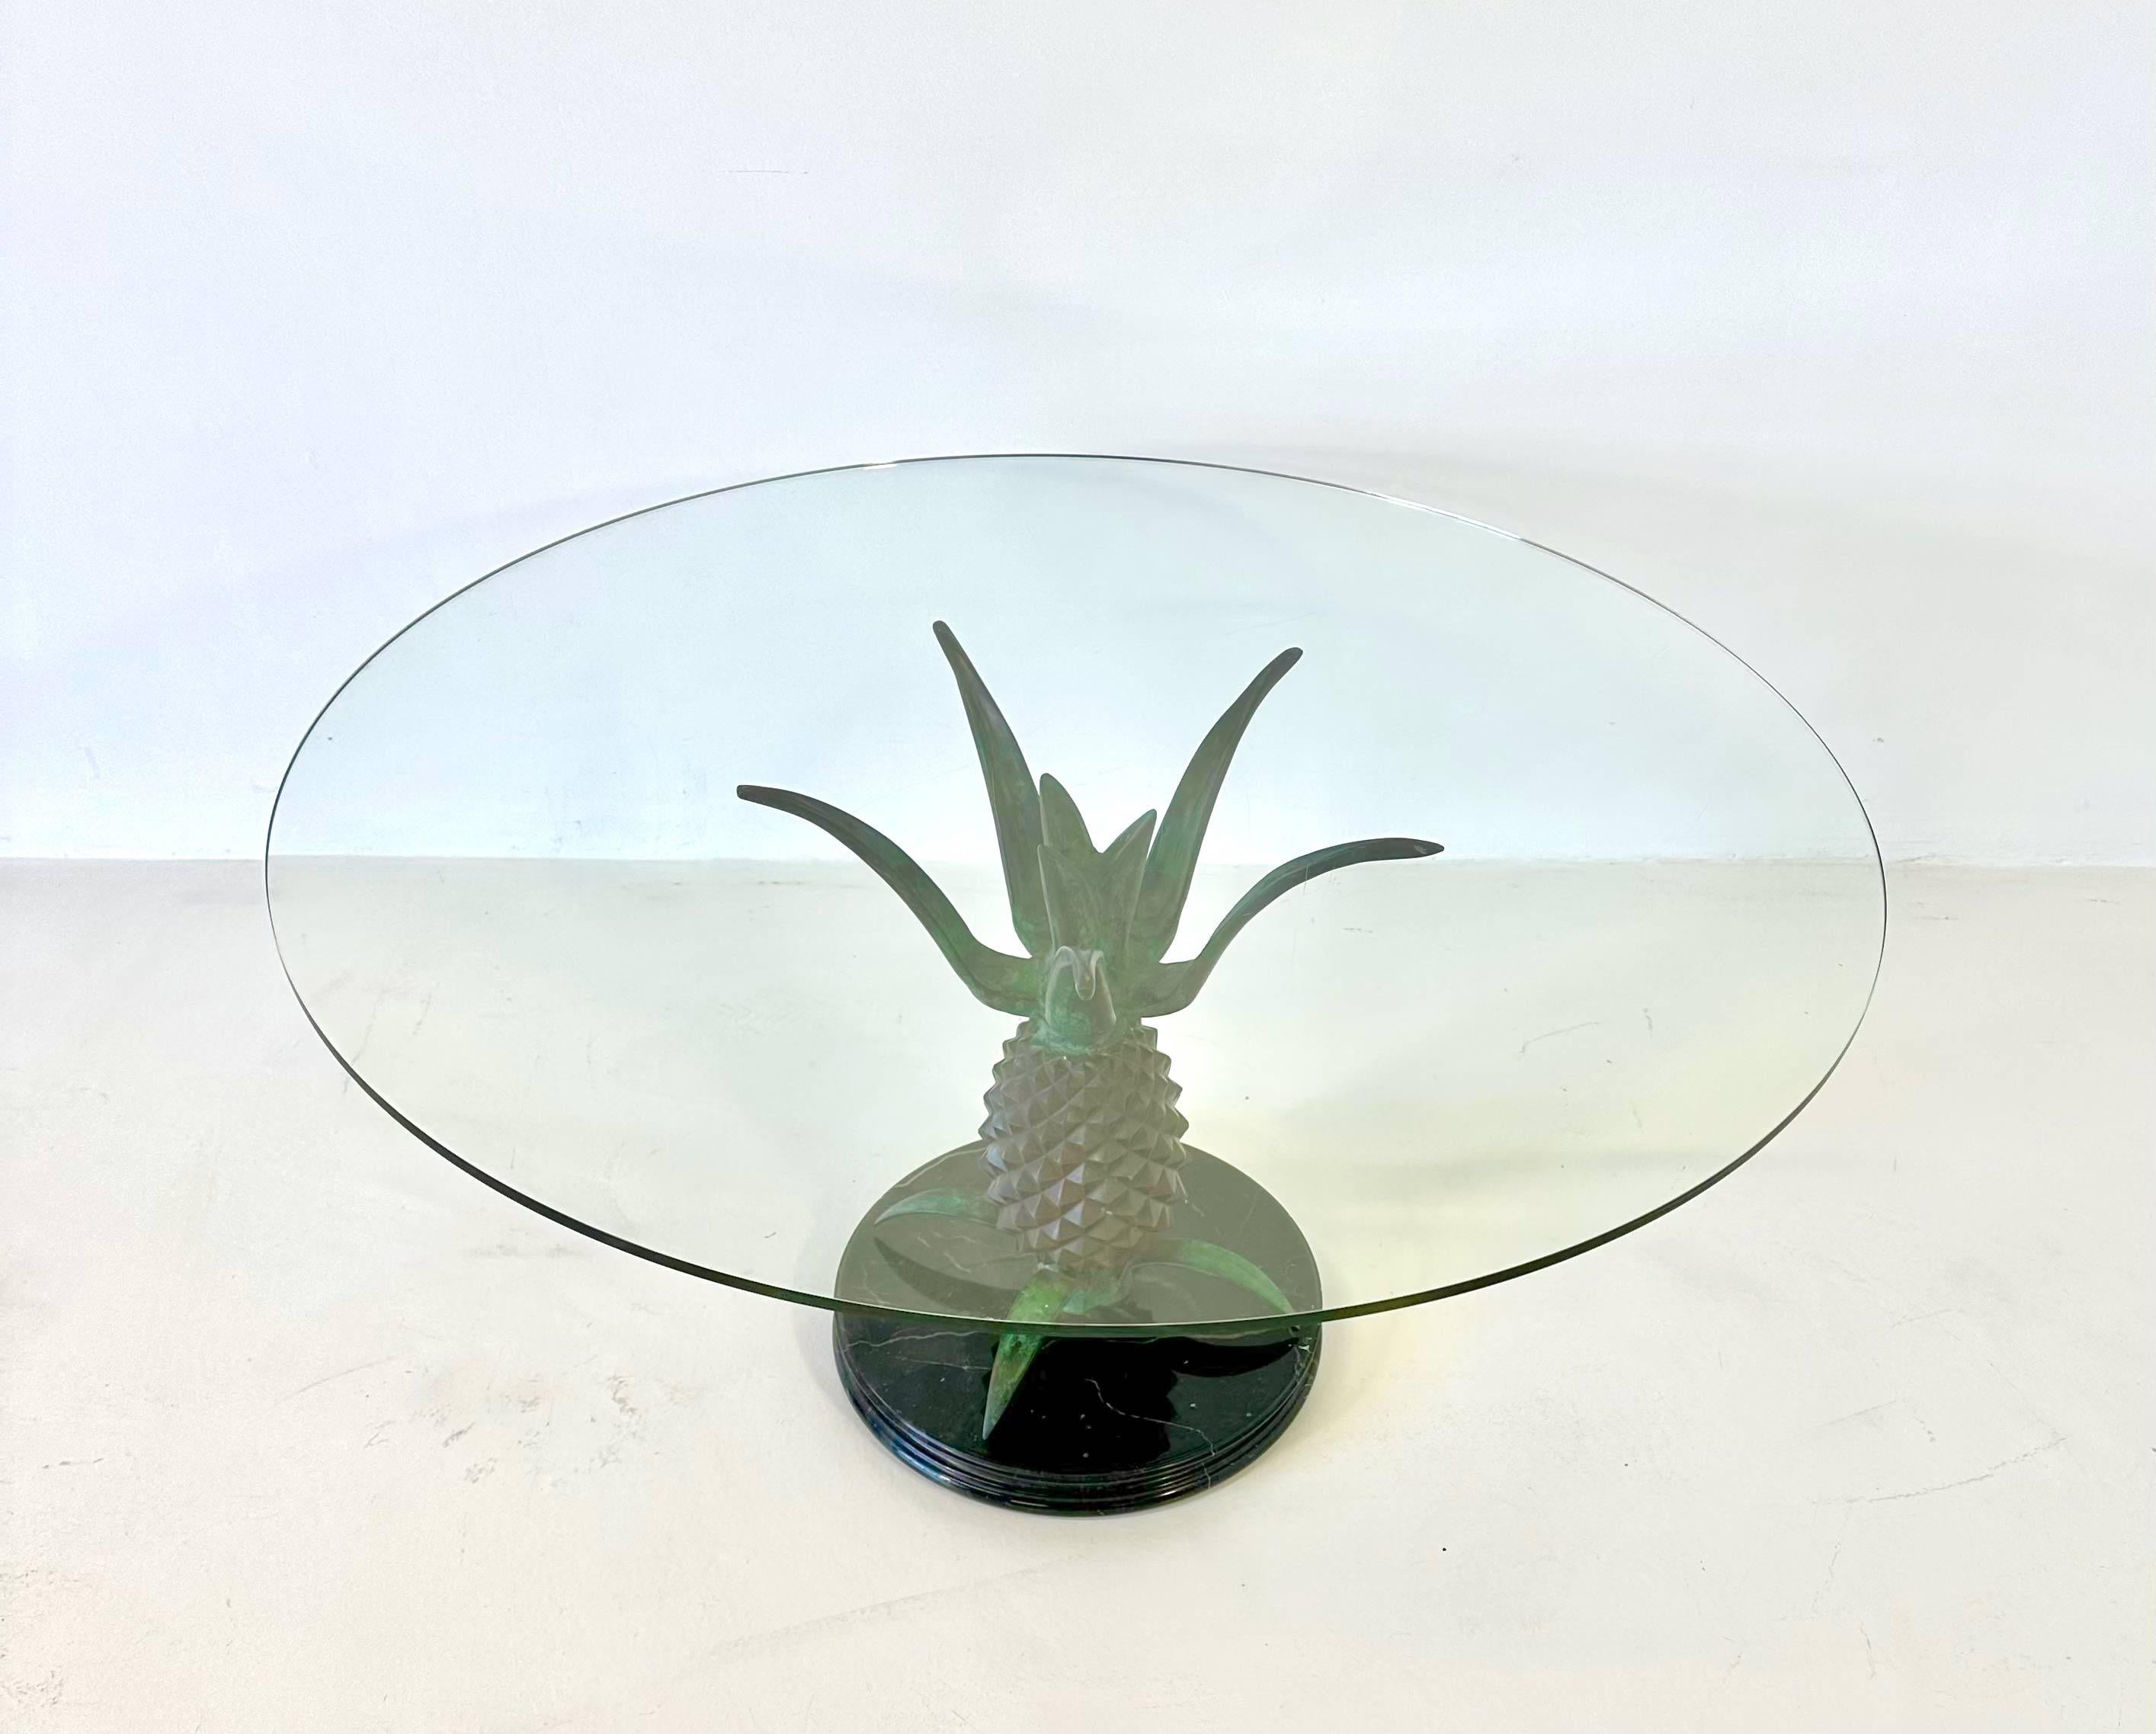 Hollywood Regency Sculptural Metal, Glass and Marble Pineapple Coffee Table, 1970s, Maison Jansen